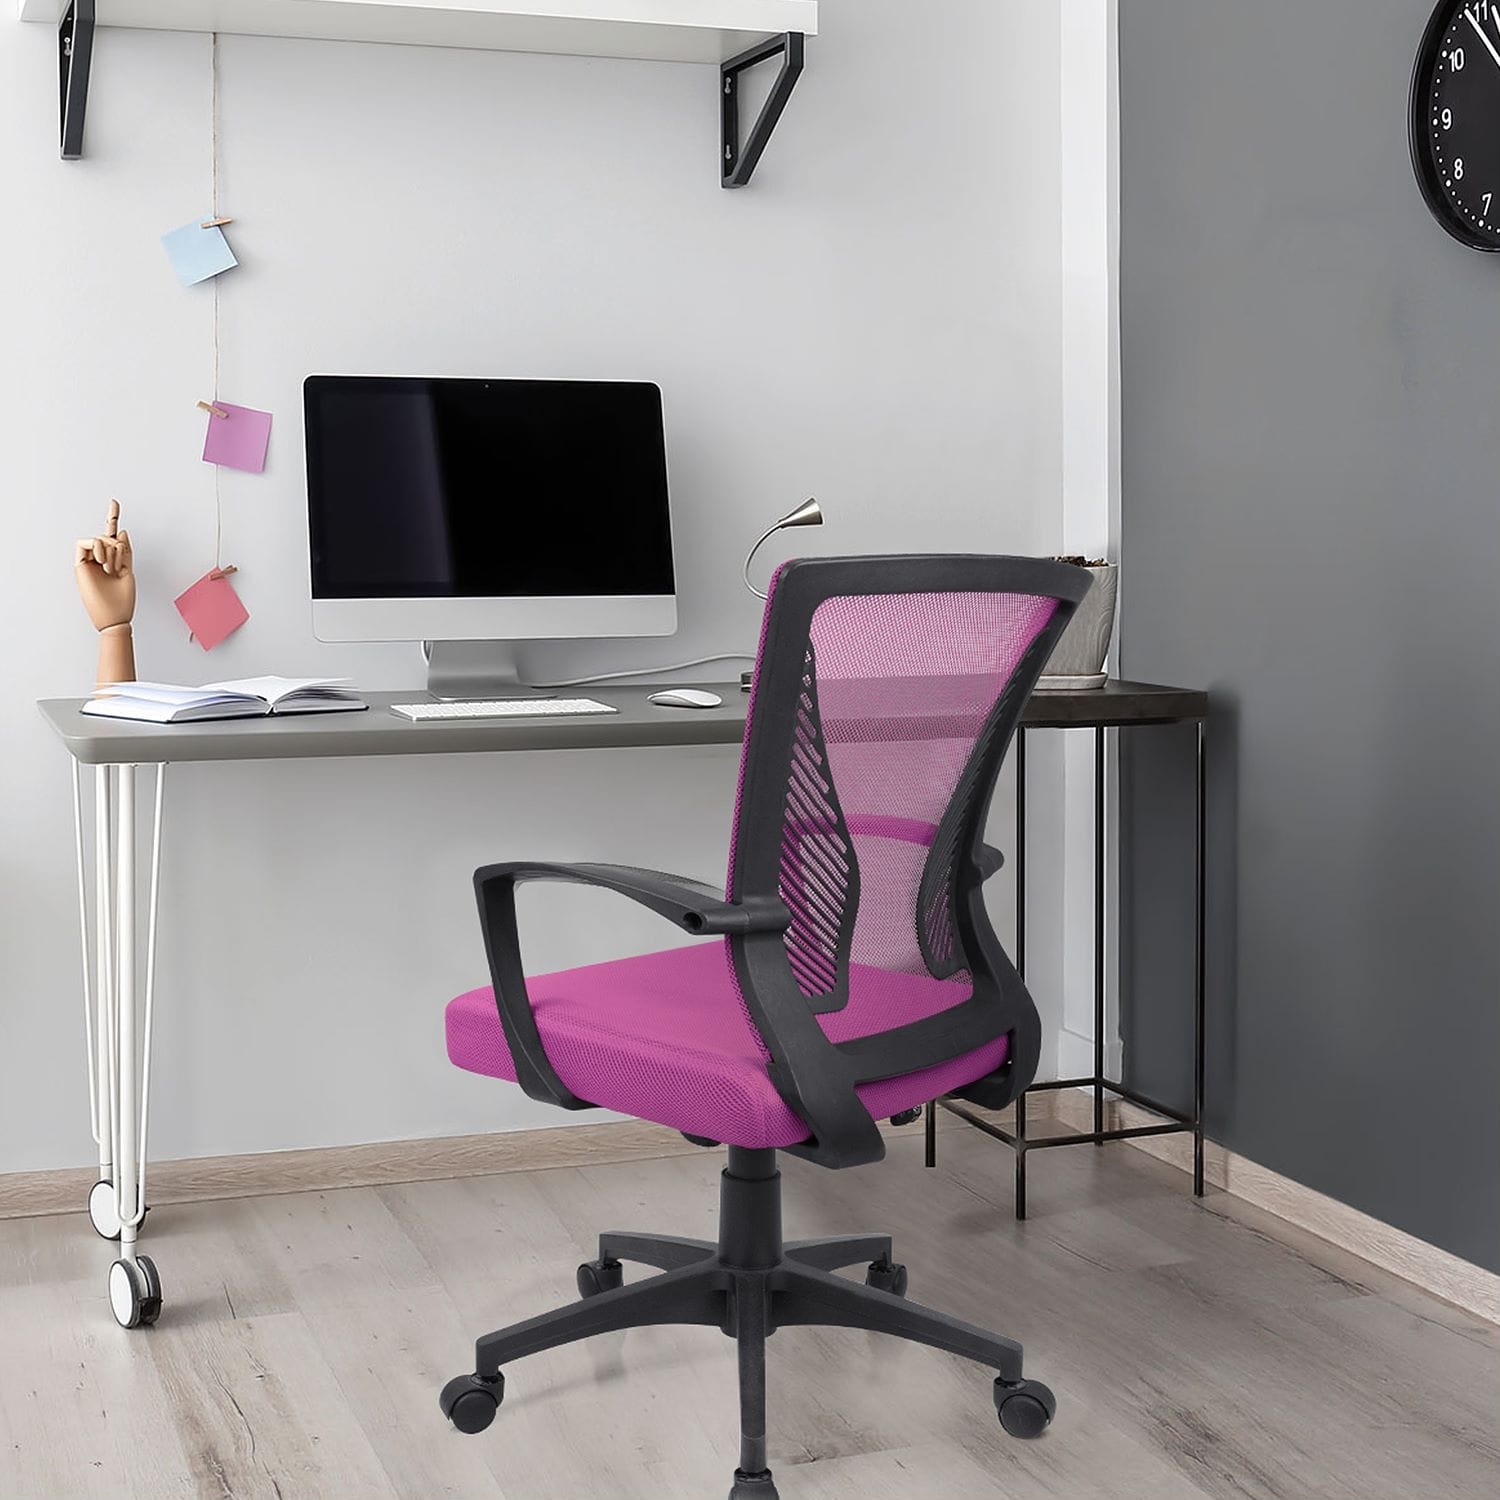 https://ak1.ostkcdn.com/images/products/is/images/direct/91ba03ac30c69ecdd656e4b6b6e1b860b279073d/Office-Chair-Mid-Back-Swivel-Lumbar-Support-Desk-Chair%2C-Computer-Ergonomic-Mesh-Chair-with-Armrest.jpg